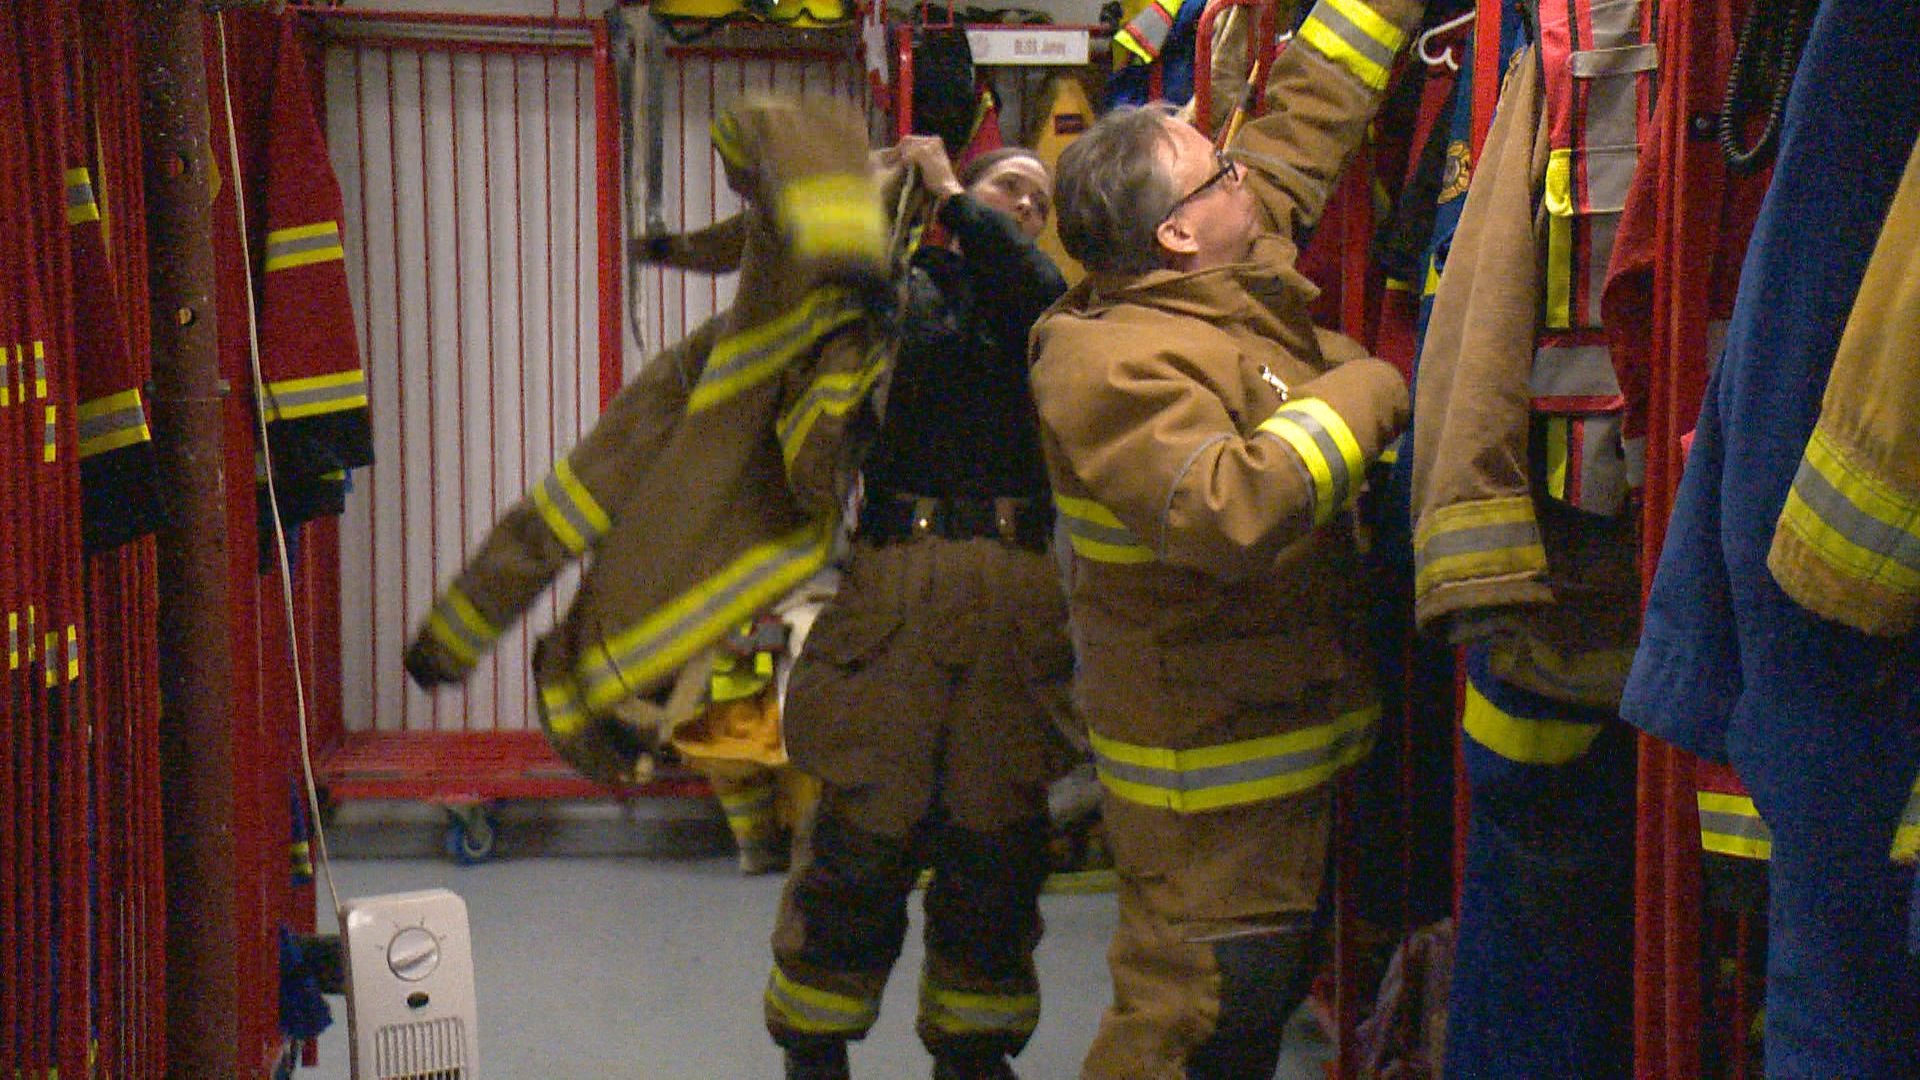 Balgonie volunteer firefighter shares what its like going into extreme cold conditions